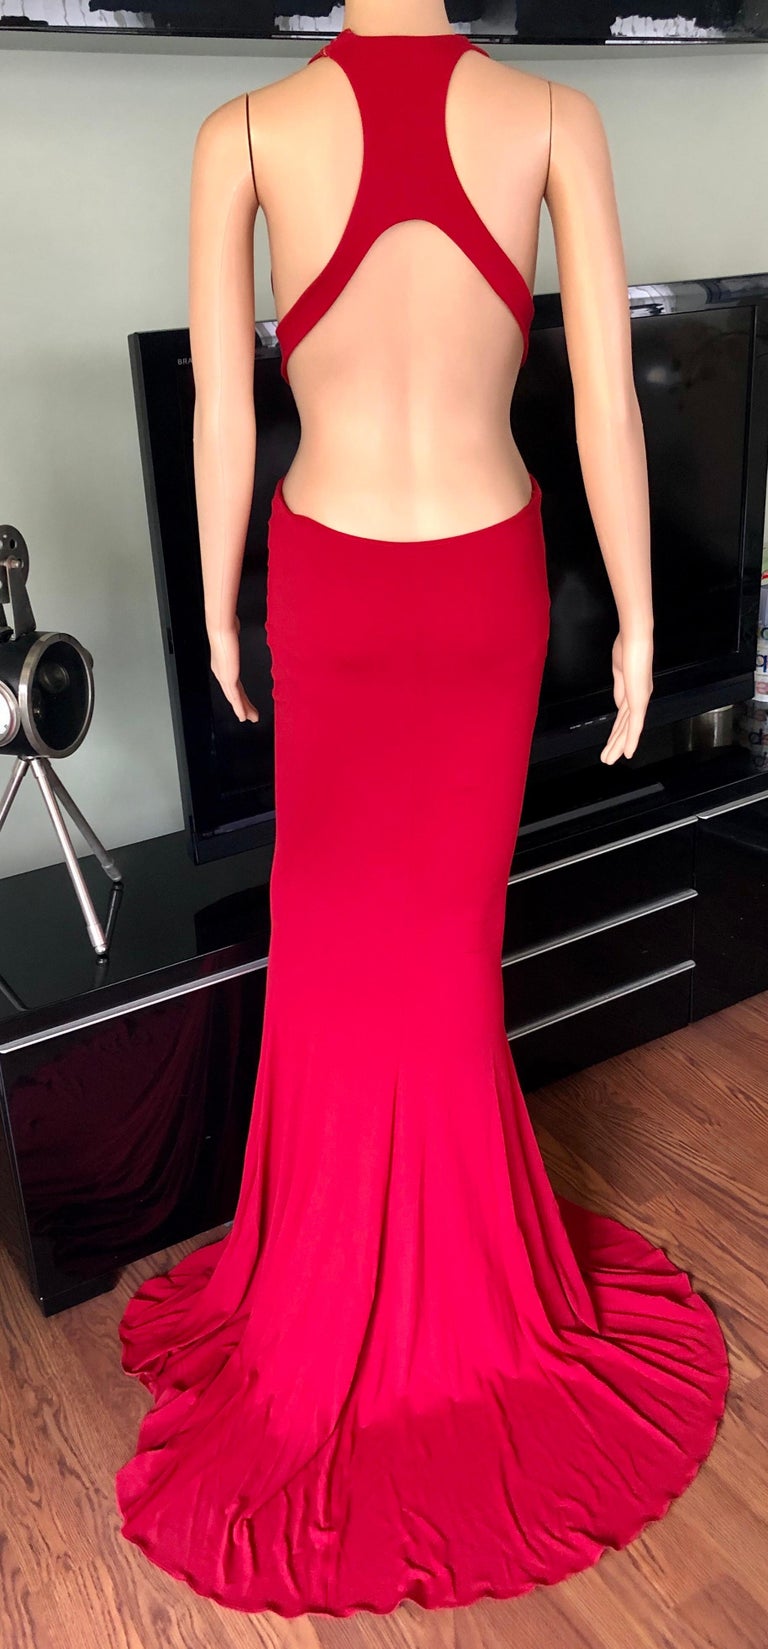 Alexandre Vauthier Cutout Backless Red Evening Dress Gown  For Sale 3